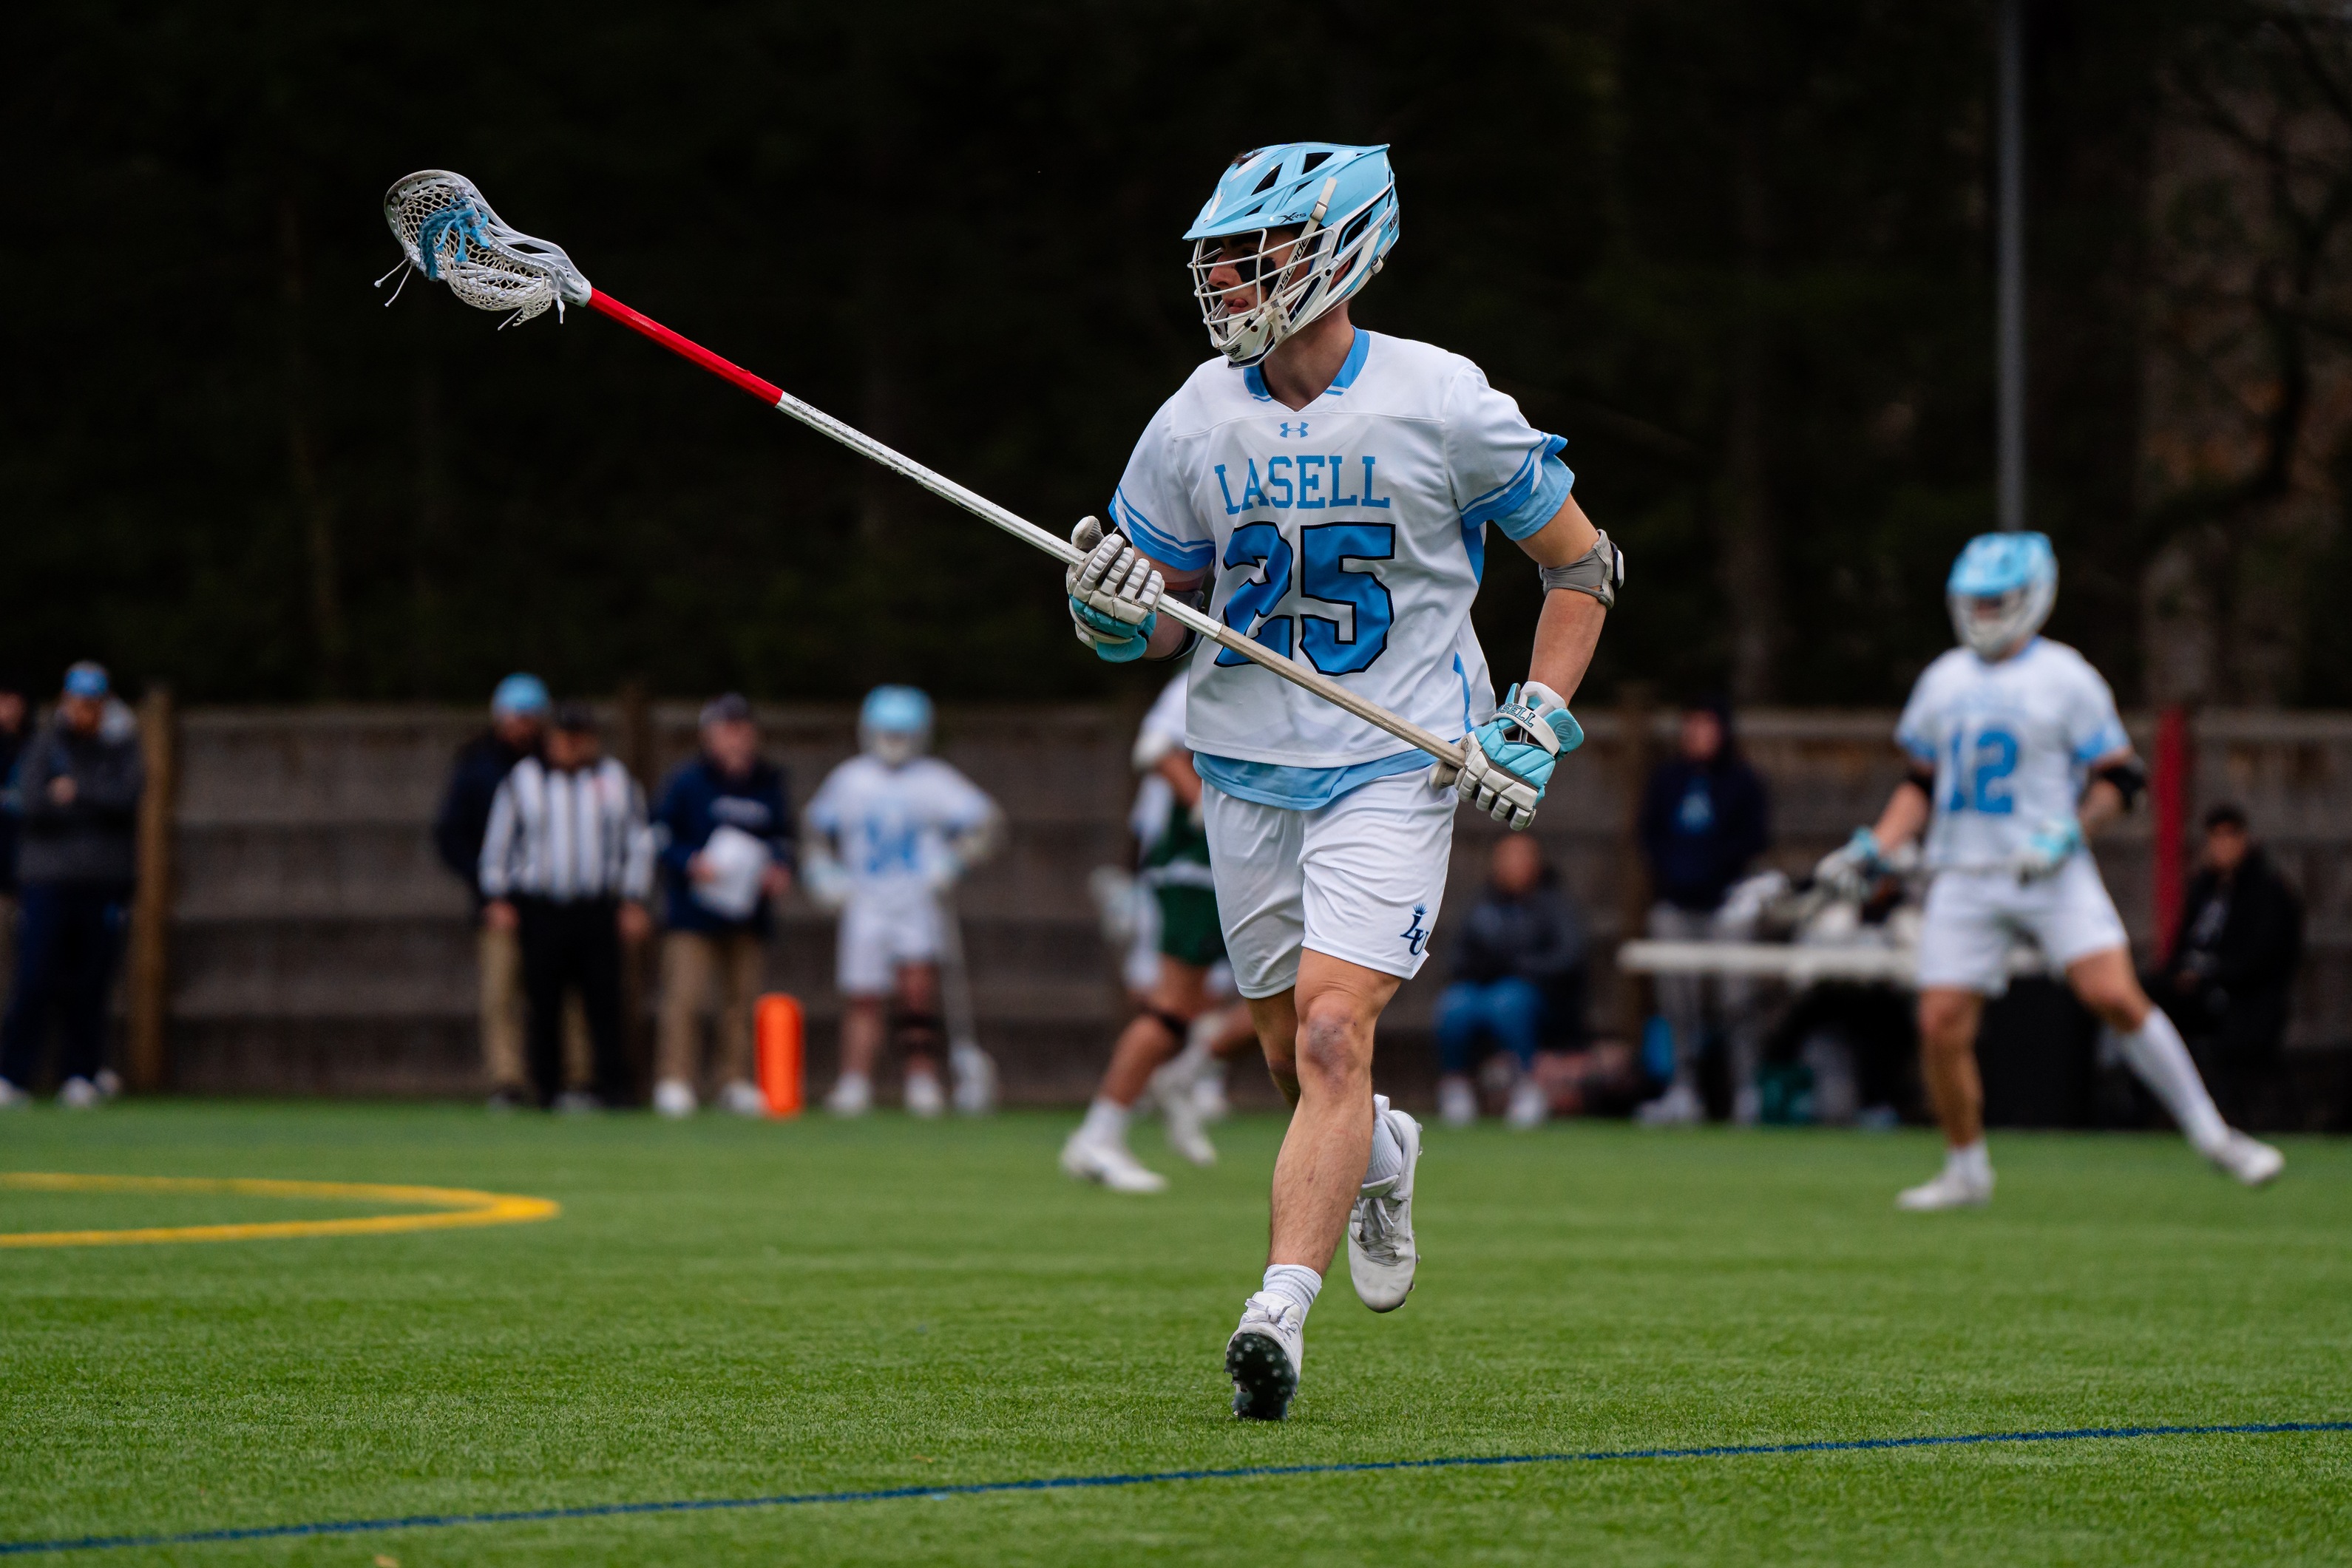 MLax: Lasers Offense Proves Too Much for the Falcons in 21-3 Win